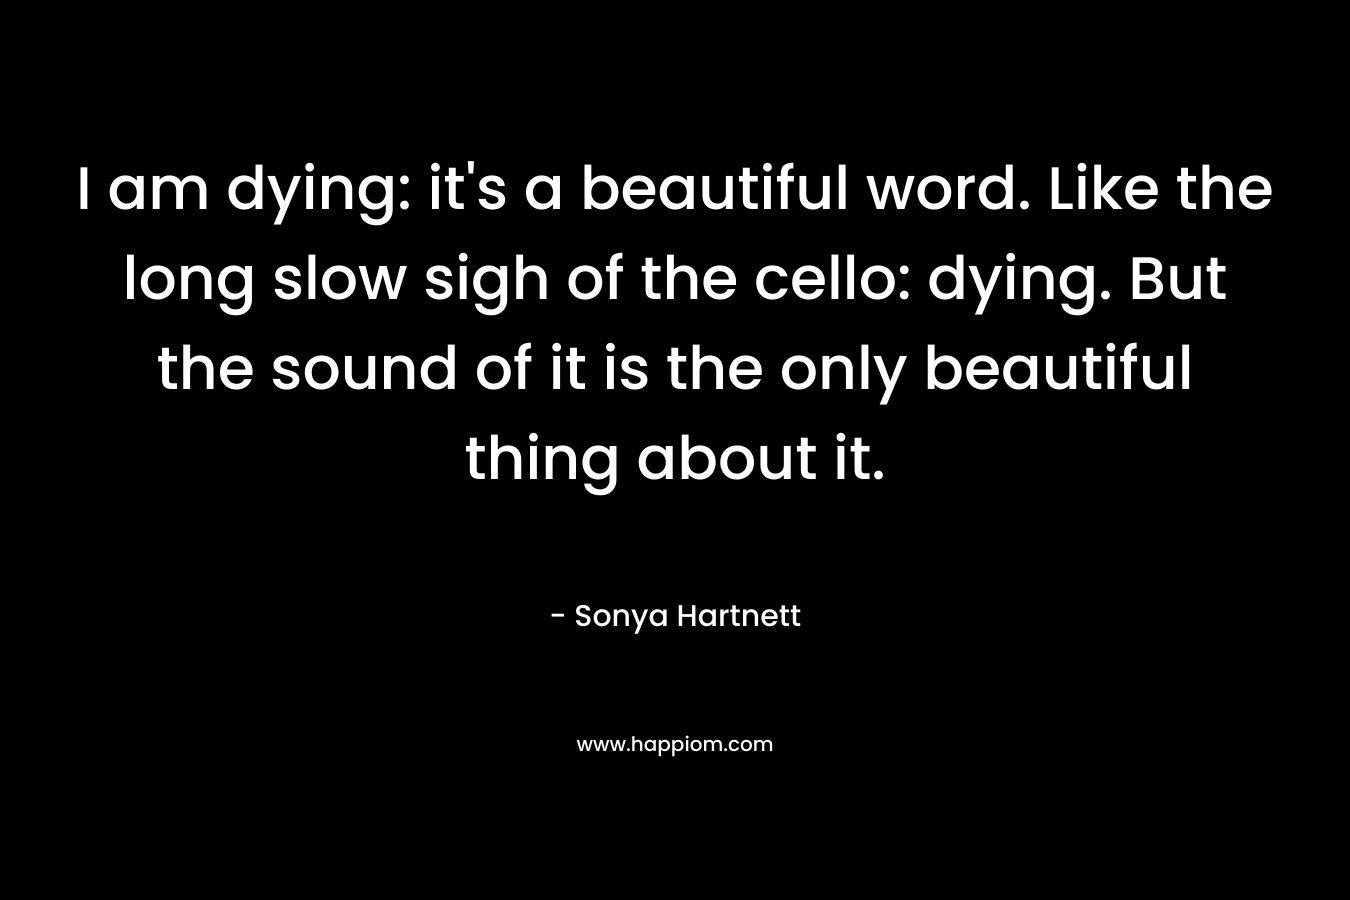 I am dying: it's a beautiful word. Like the long slow sigh of the cello: dying. But the sound of it is the only beautiful thing about it.